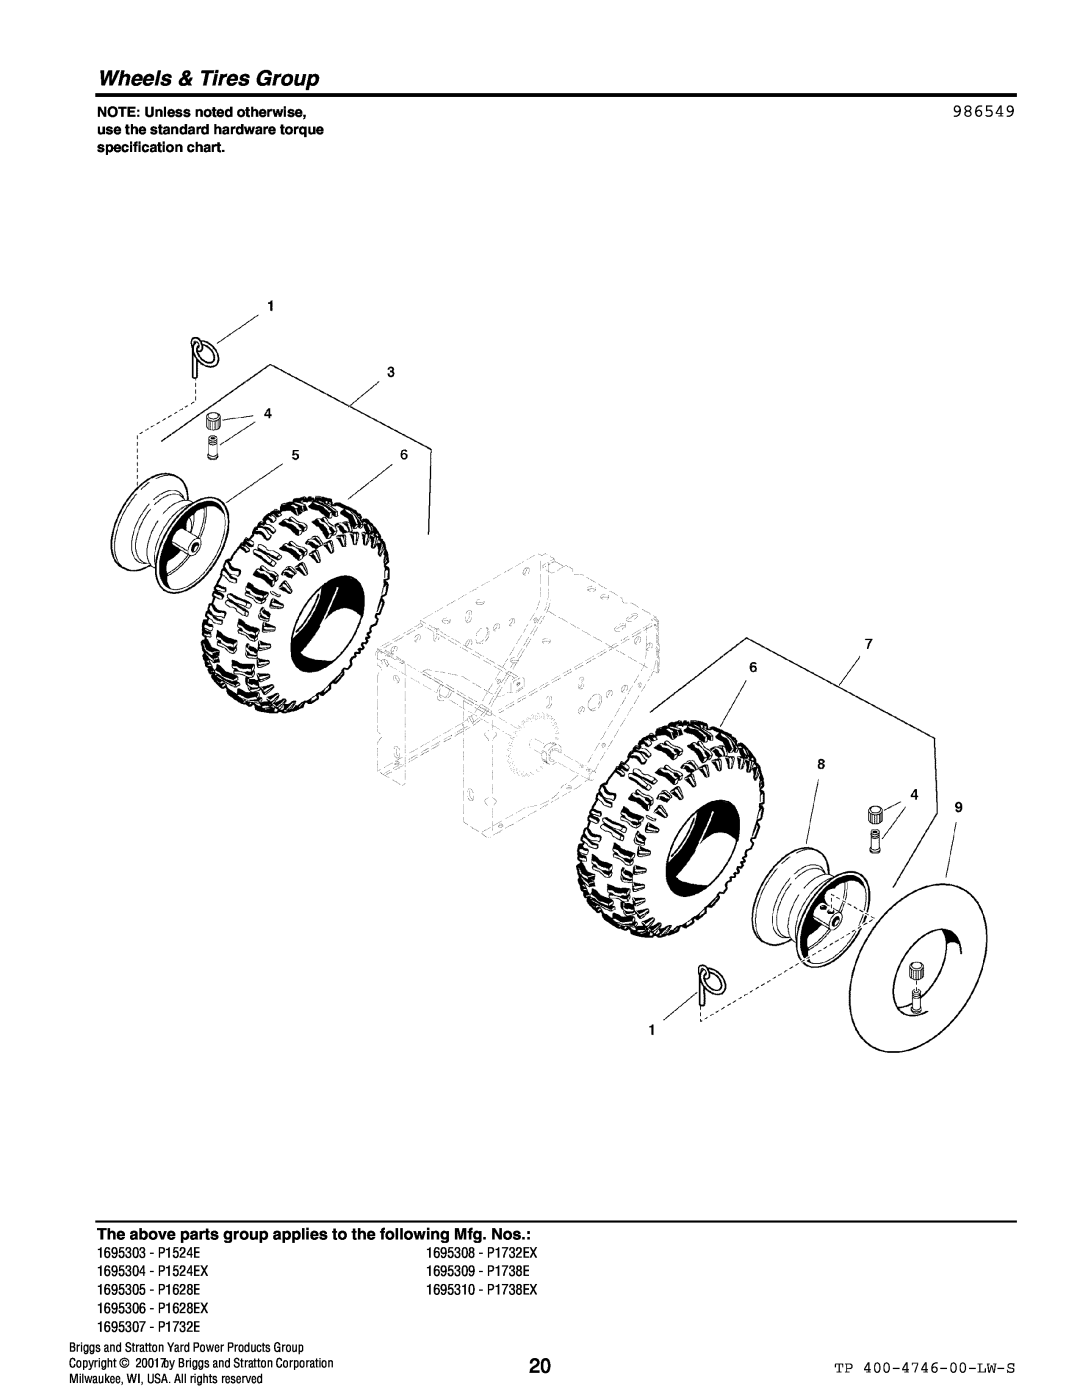 Simplicity 1695306, 1695310, 1695305, 1695309, 1695307, 1695308 manual Wheels & Tires Group, 986549, NOTE Unless noted otherwise 